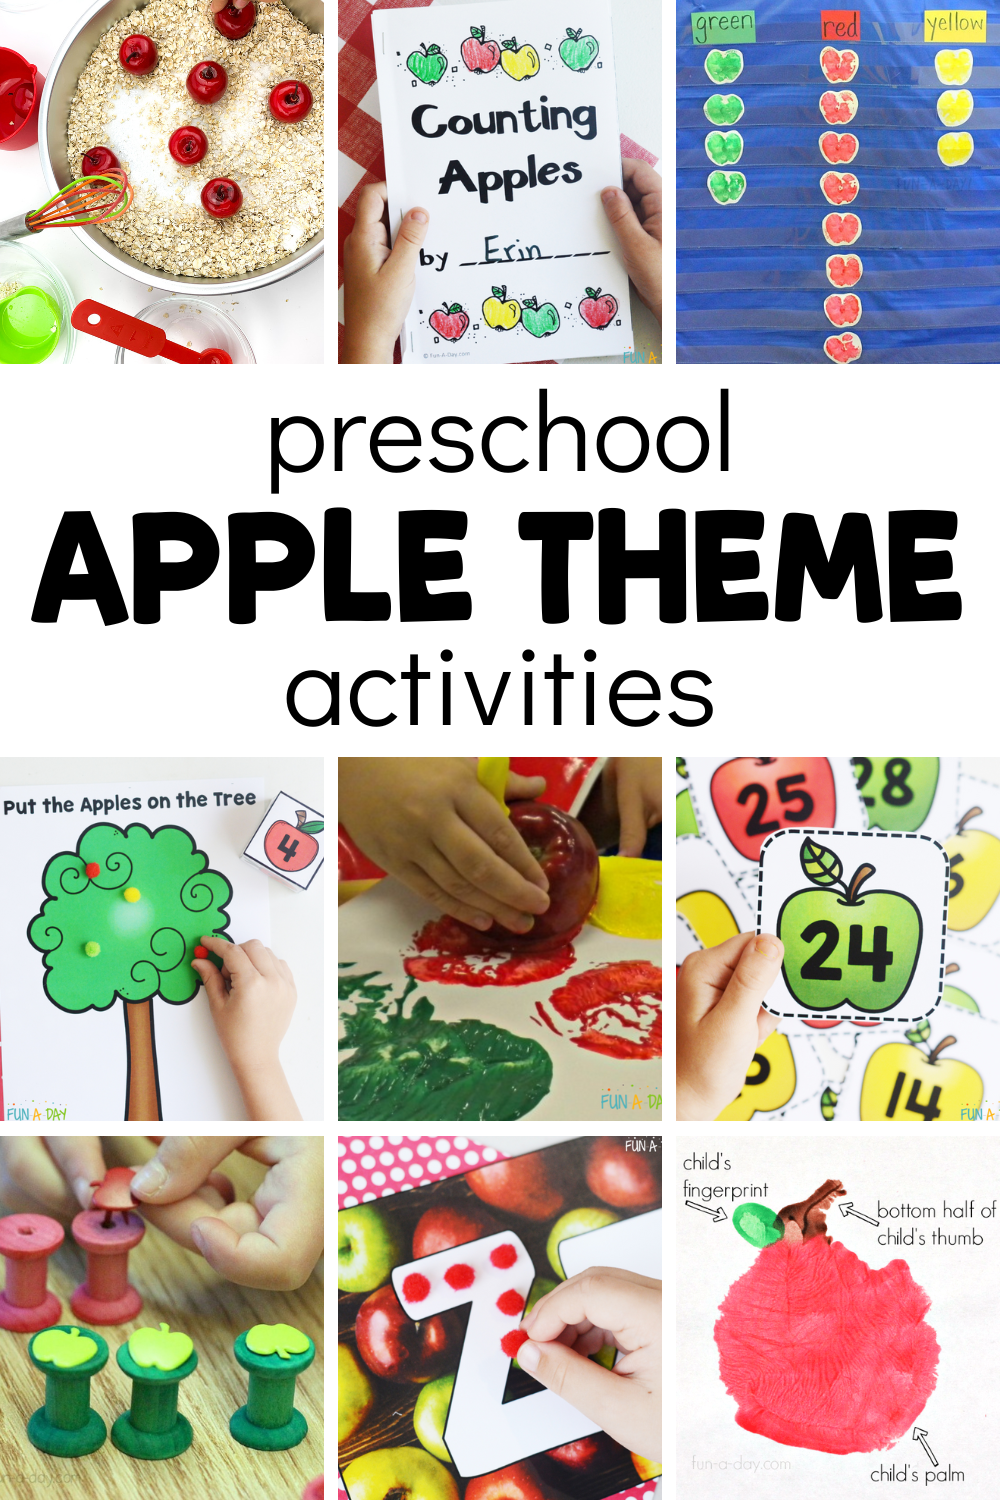 9 apple ideas with text that reads preschool apple theme activities